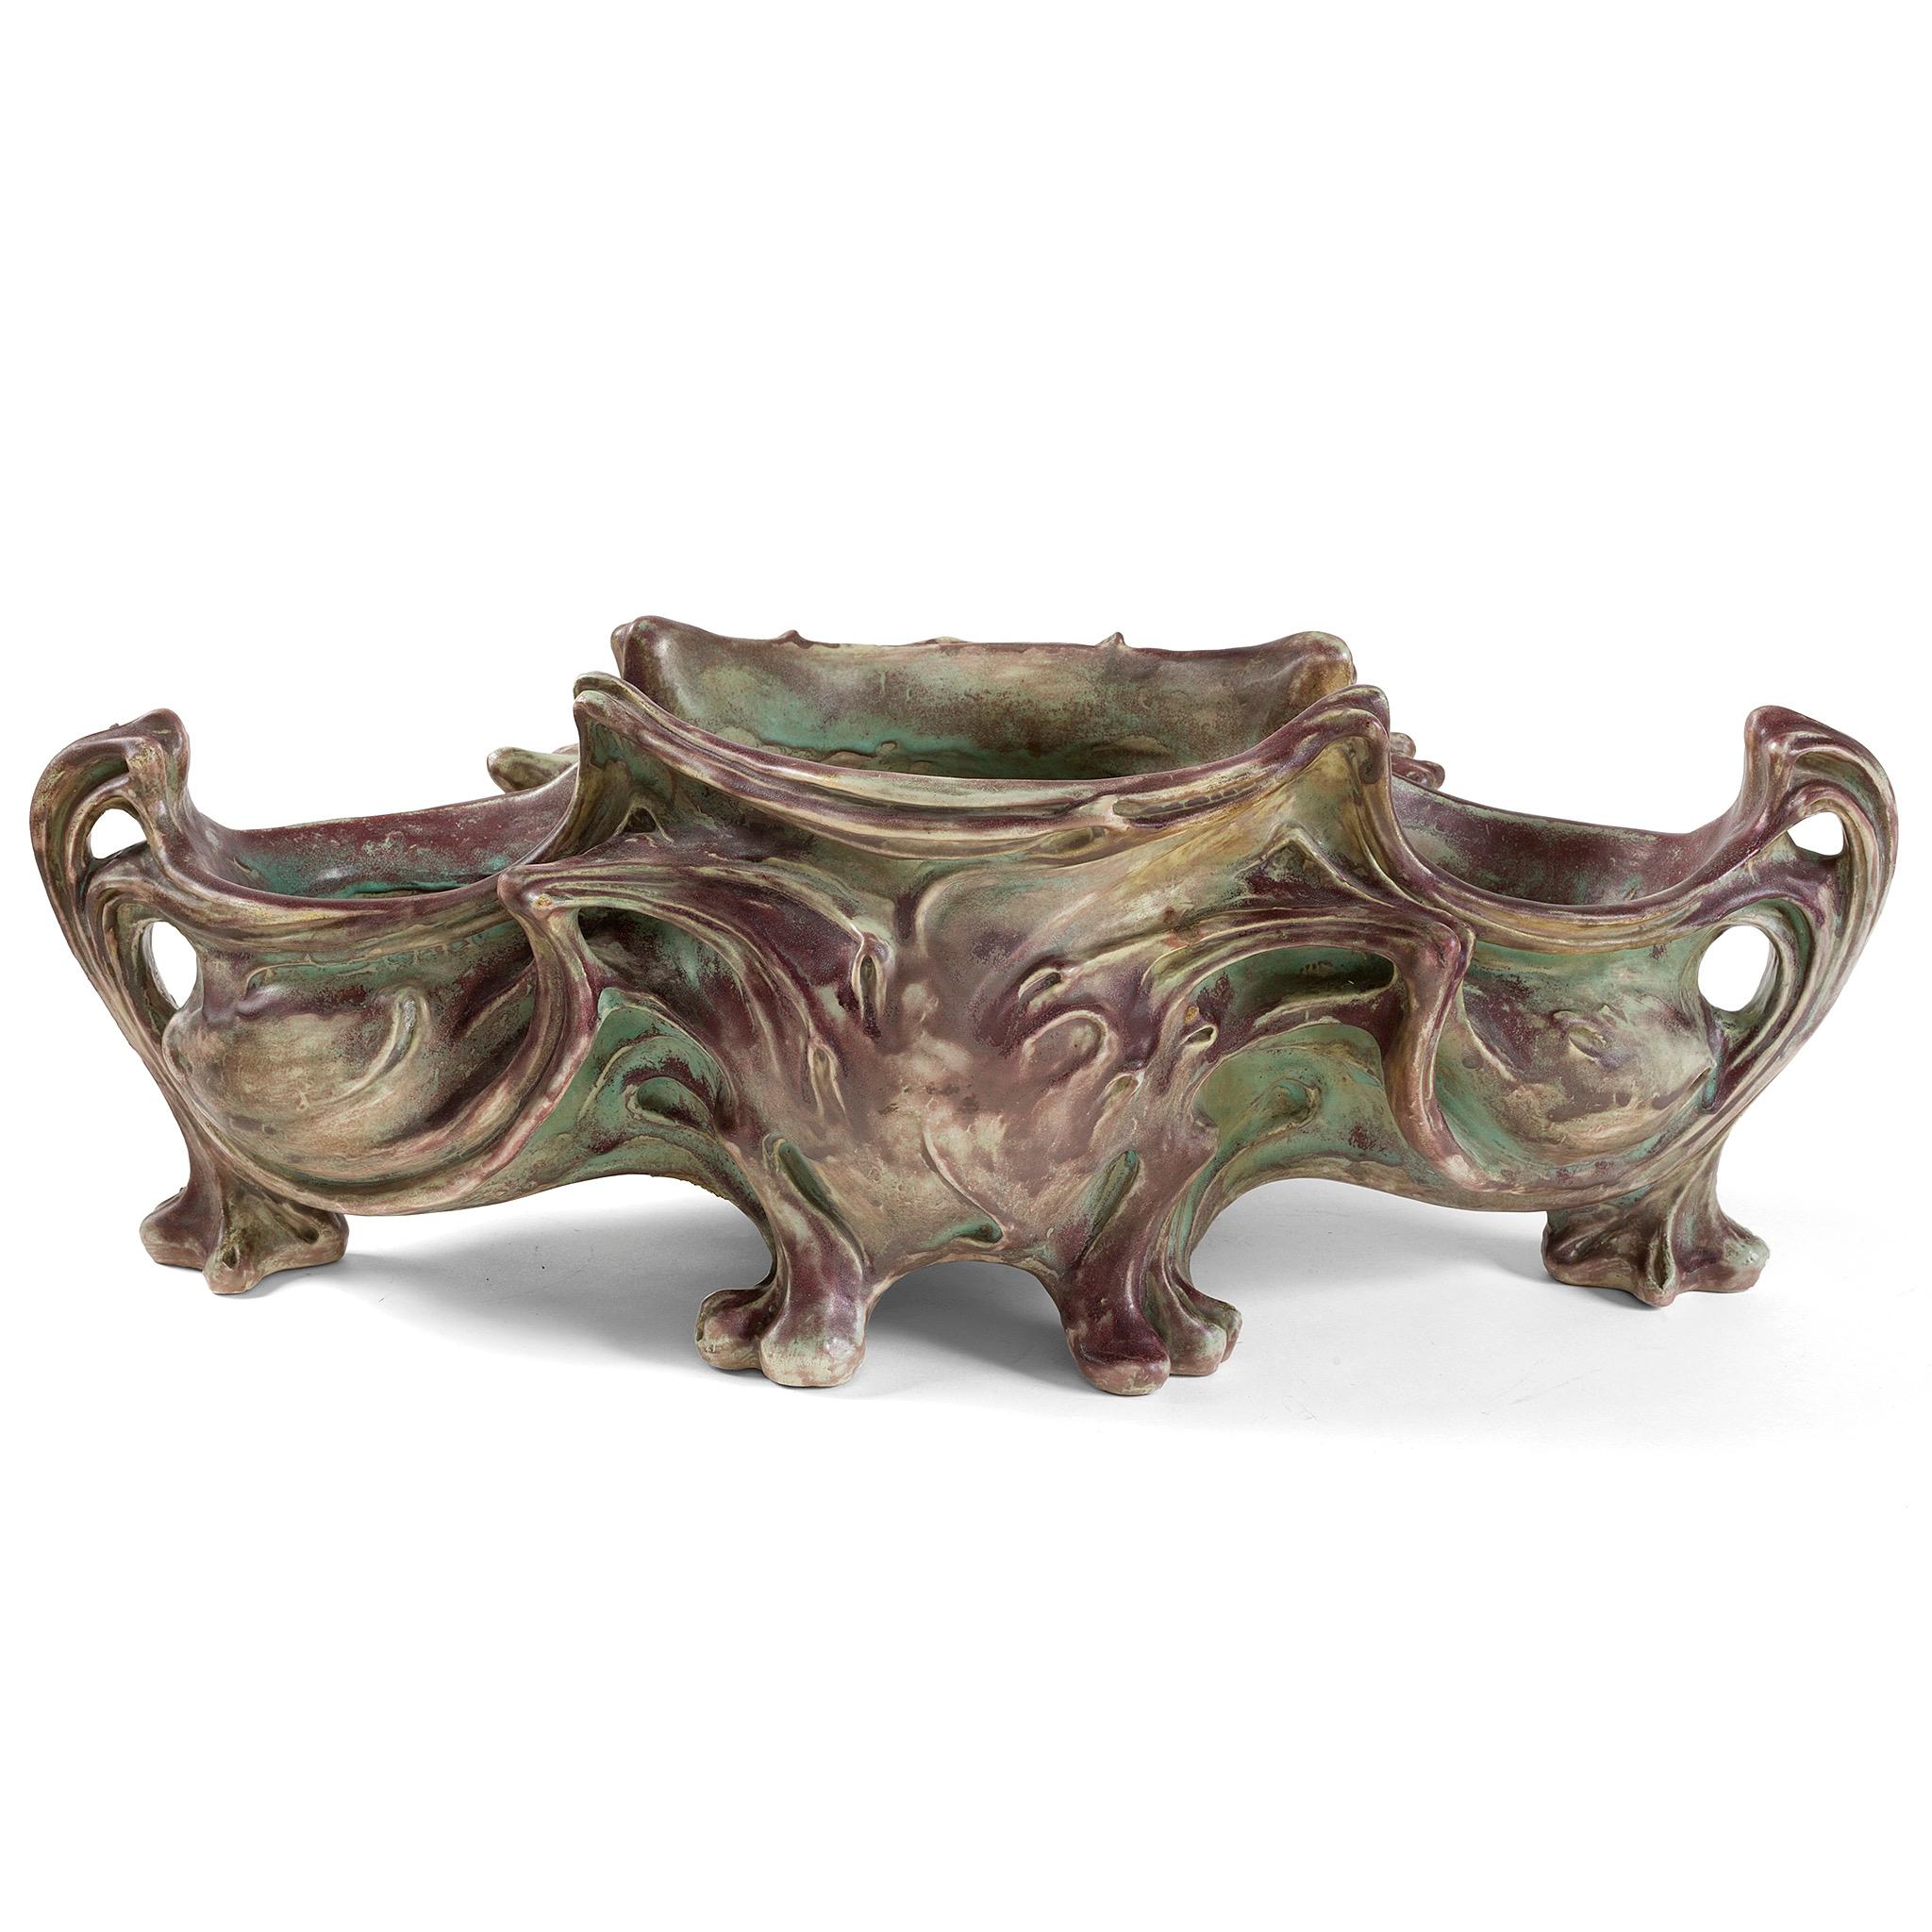 An ocean of sinuous, sweeping lines frozen in motion, this large-scale ceramic Art Nouveau planter by Hector Guimard (executed by Gilardoni et Brault, Choisy-le-Roi), demonstrates in an arresting array of earthen greenish and purplish hues, and is